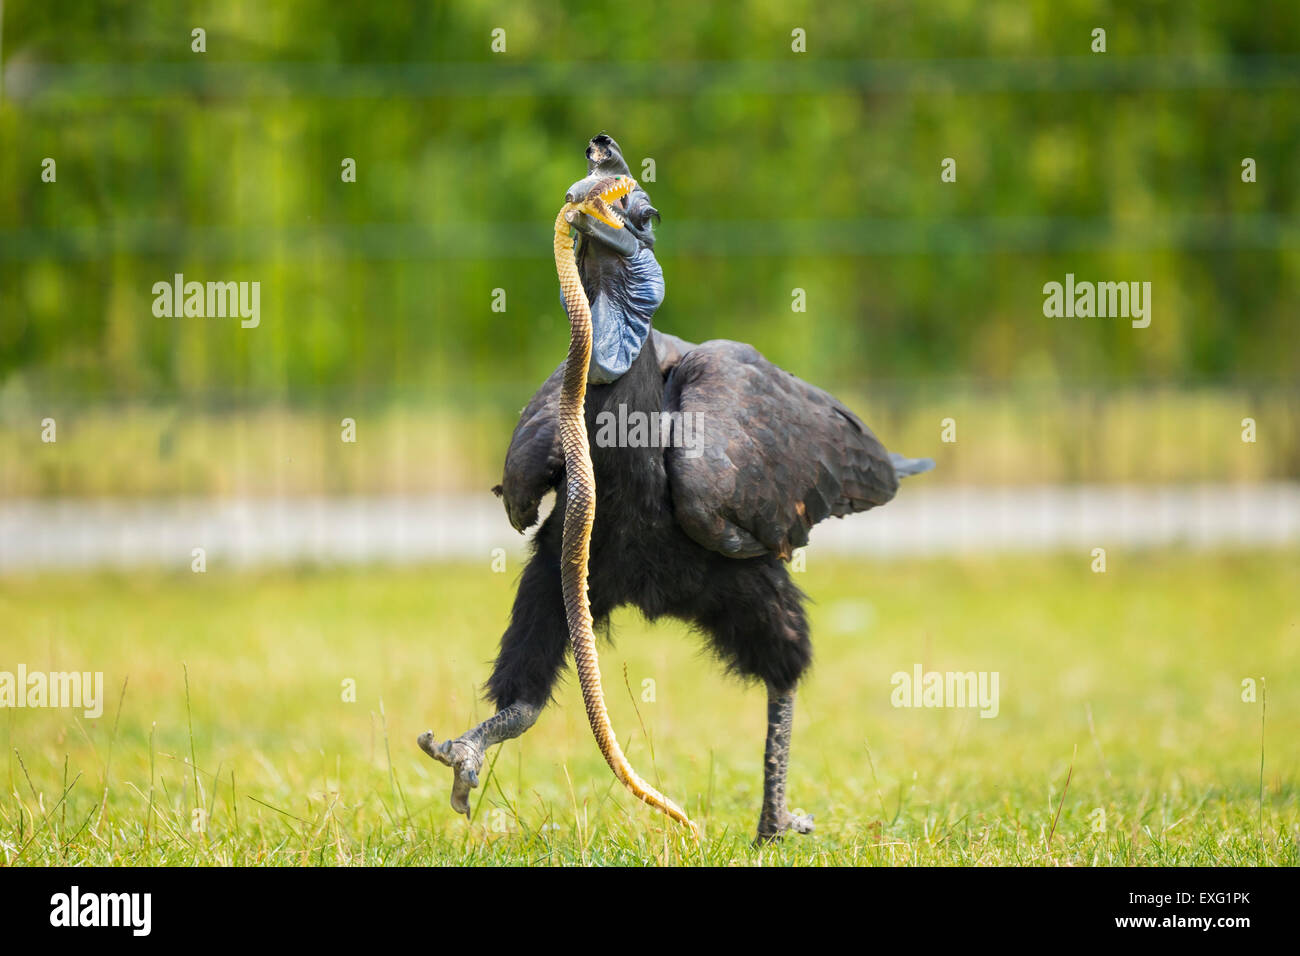 A northern ground hornbill killing a toy snake at a bird show. Stock Photo